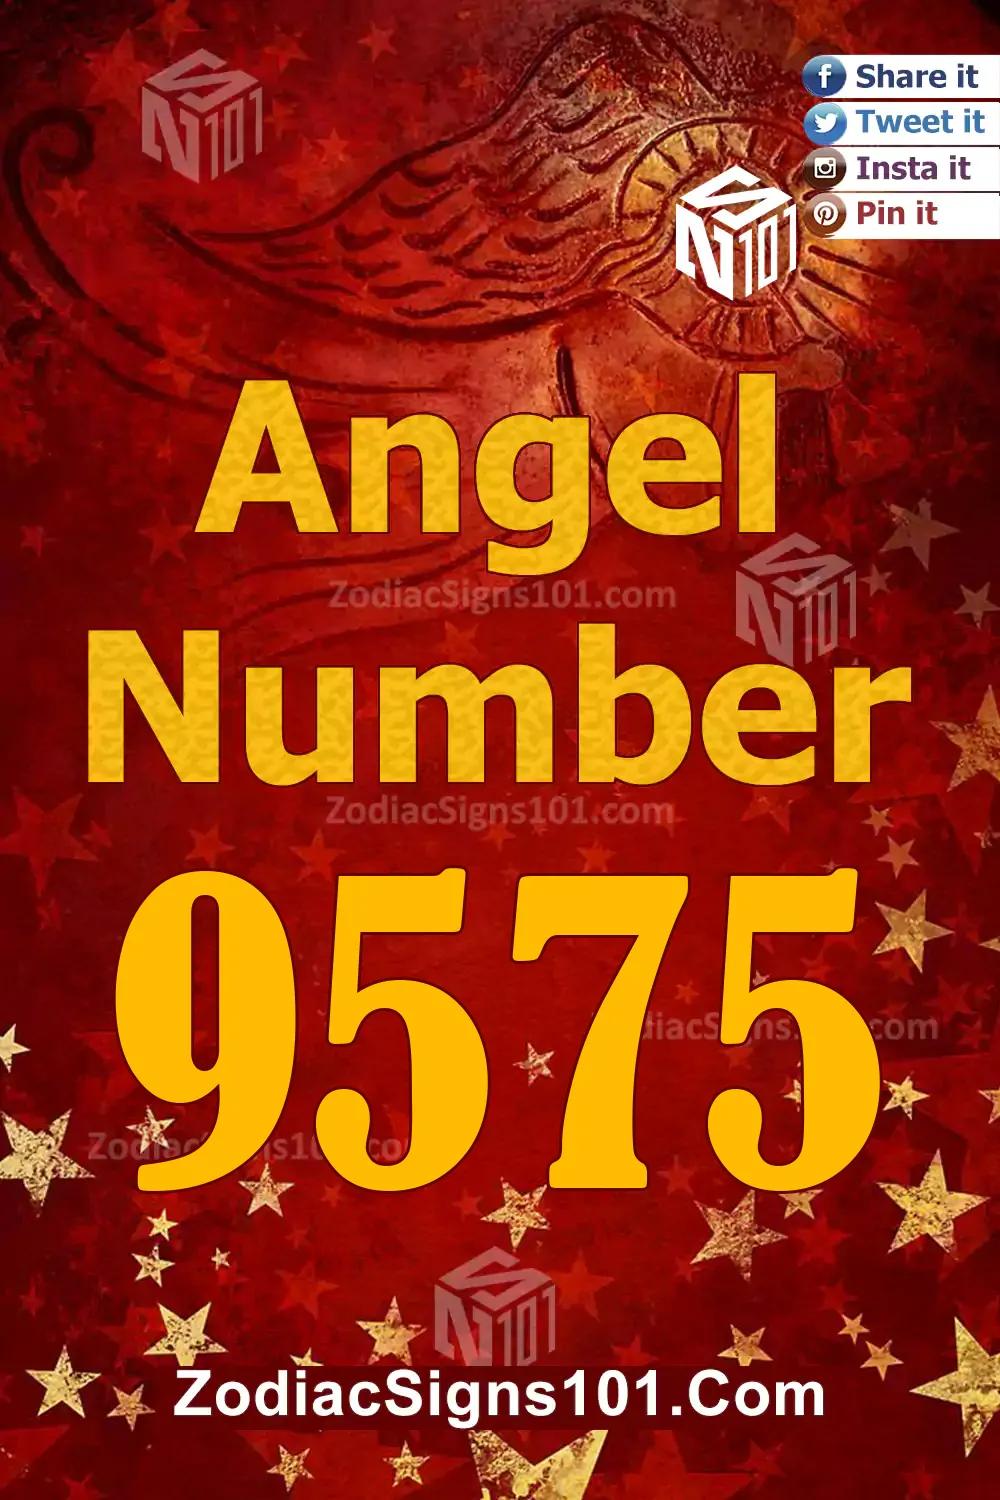 9575 Angel Number Meaning